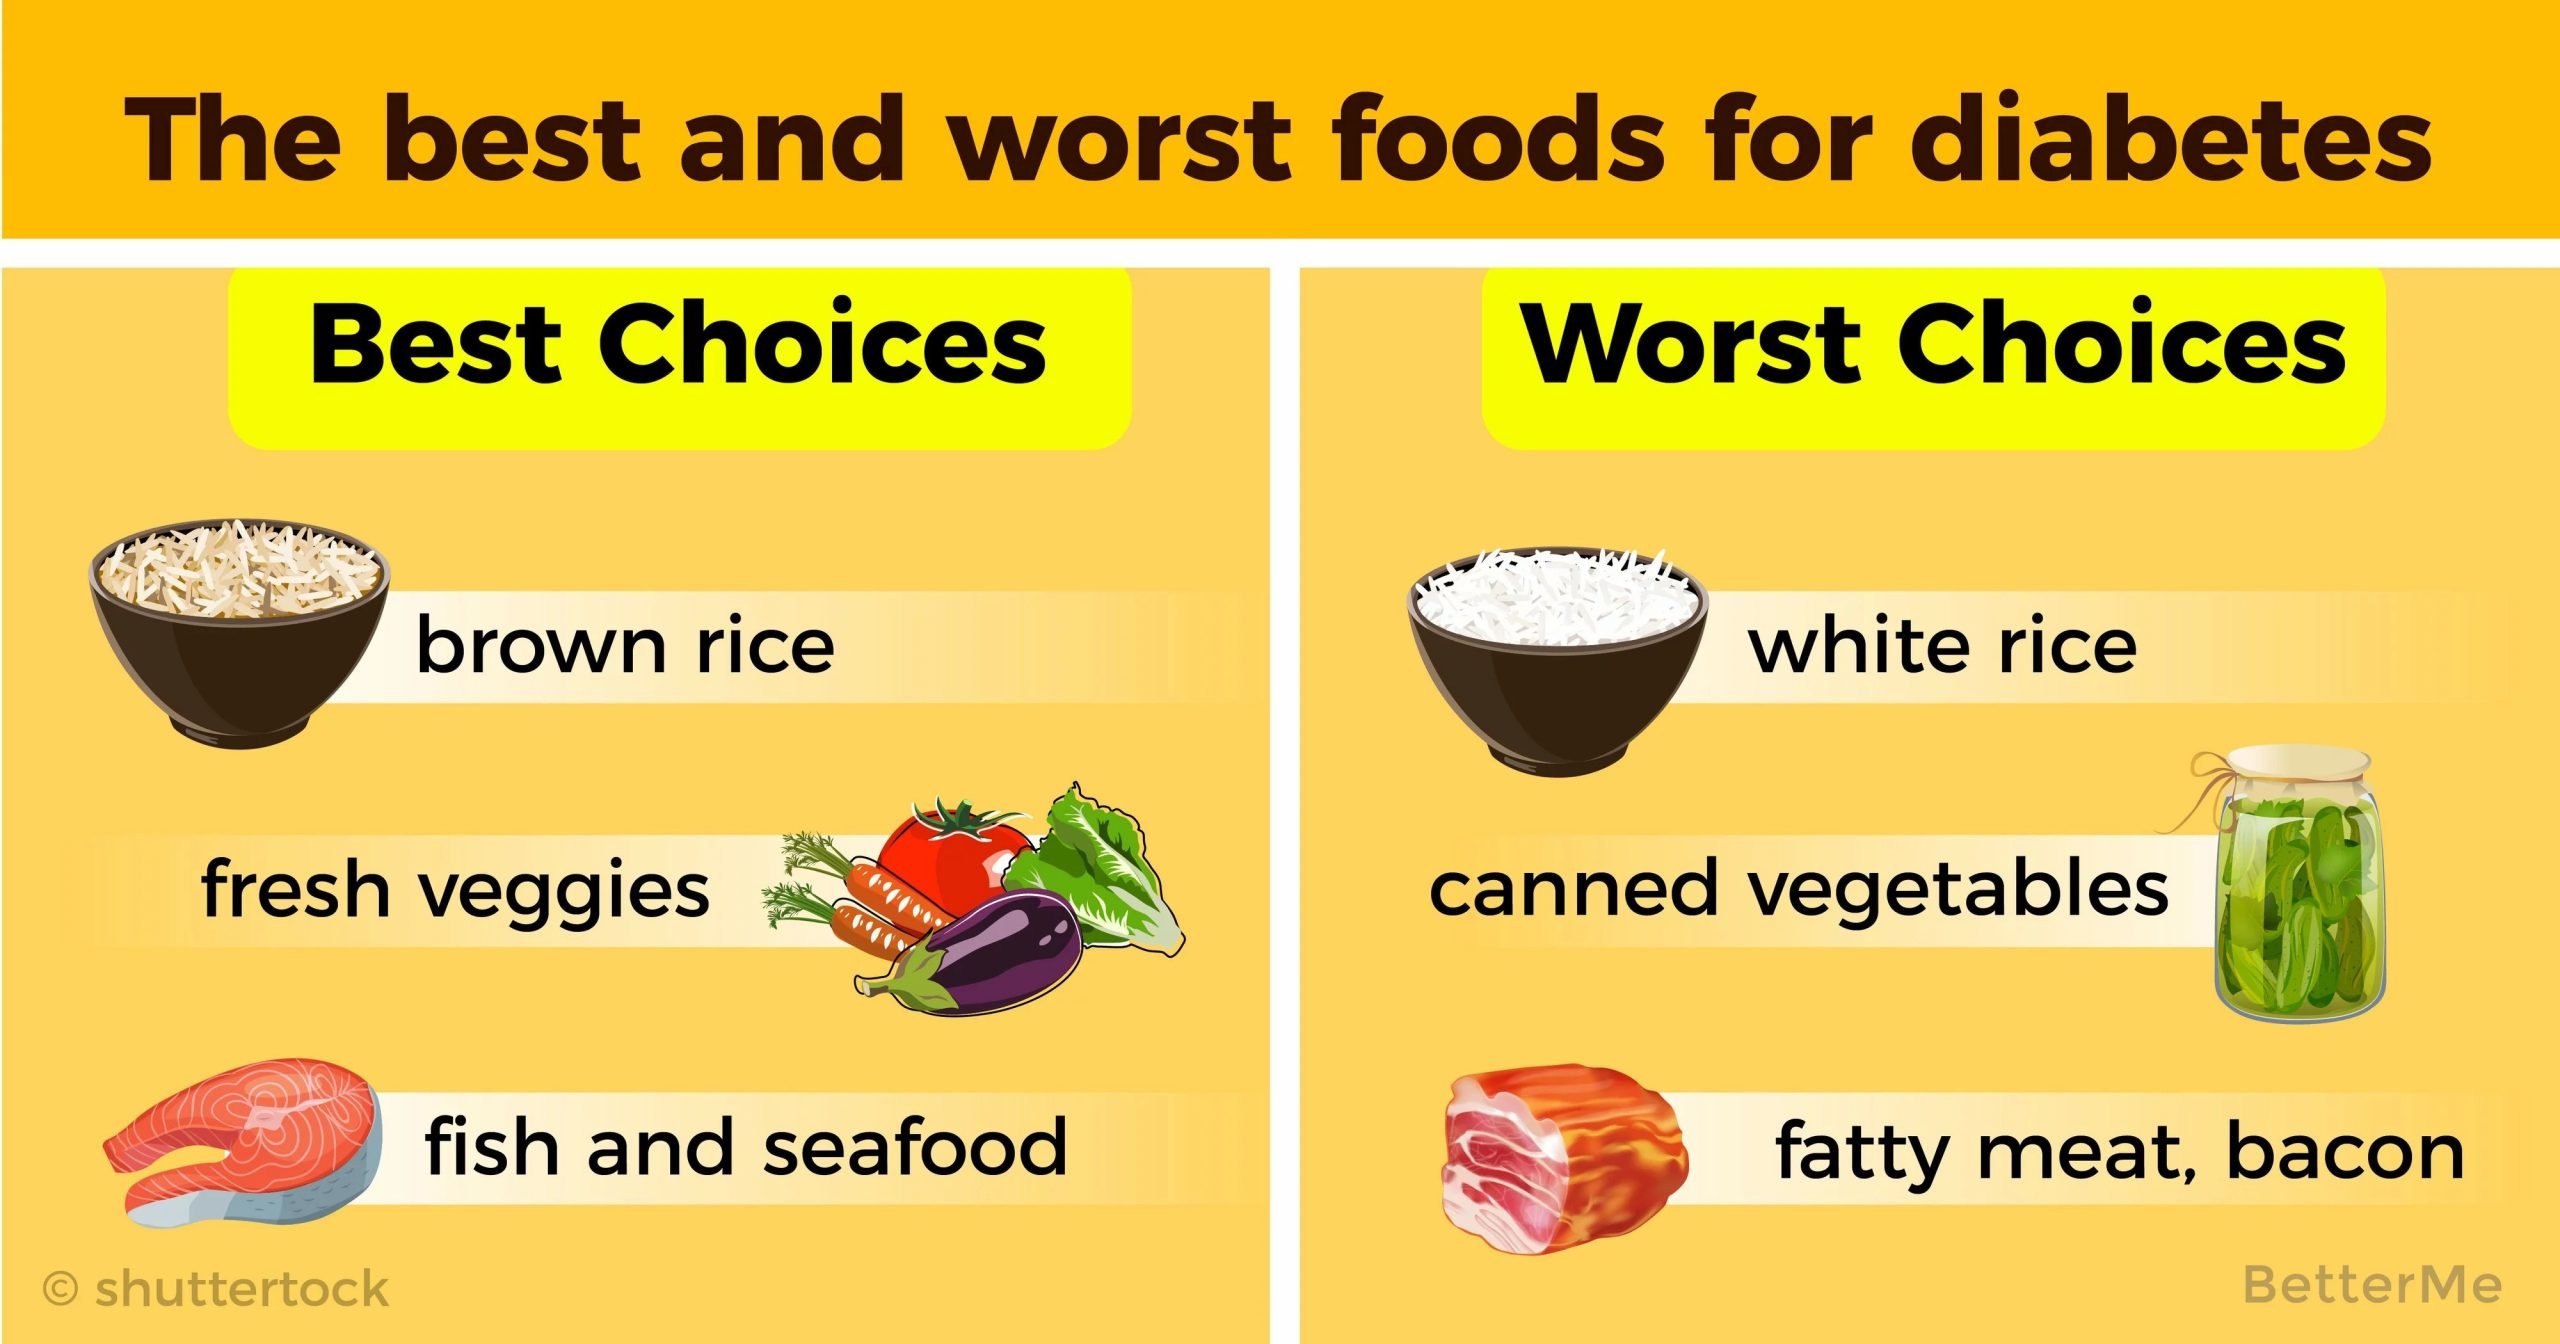 The best and worst foods for diabetes